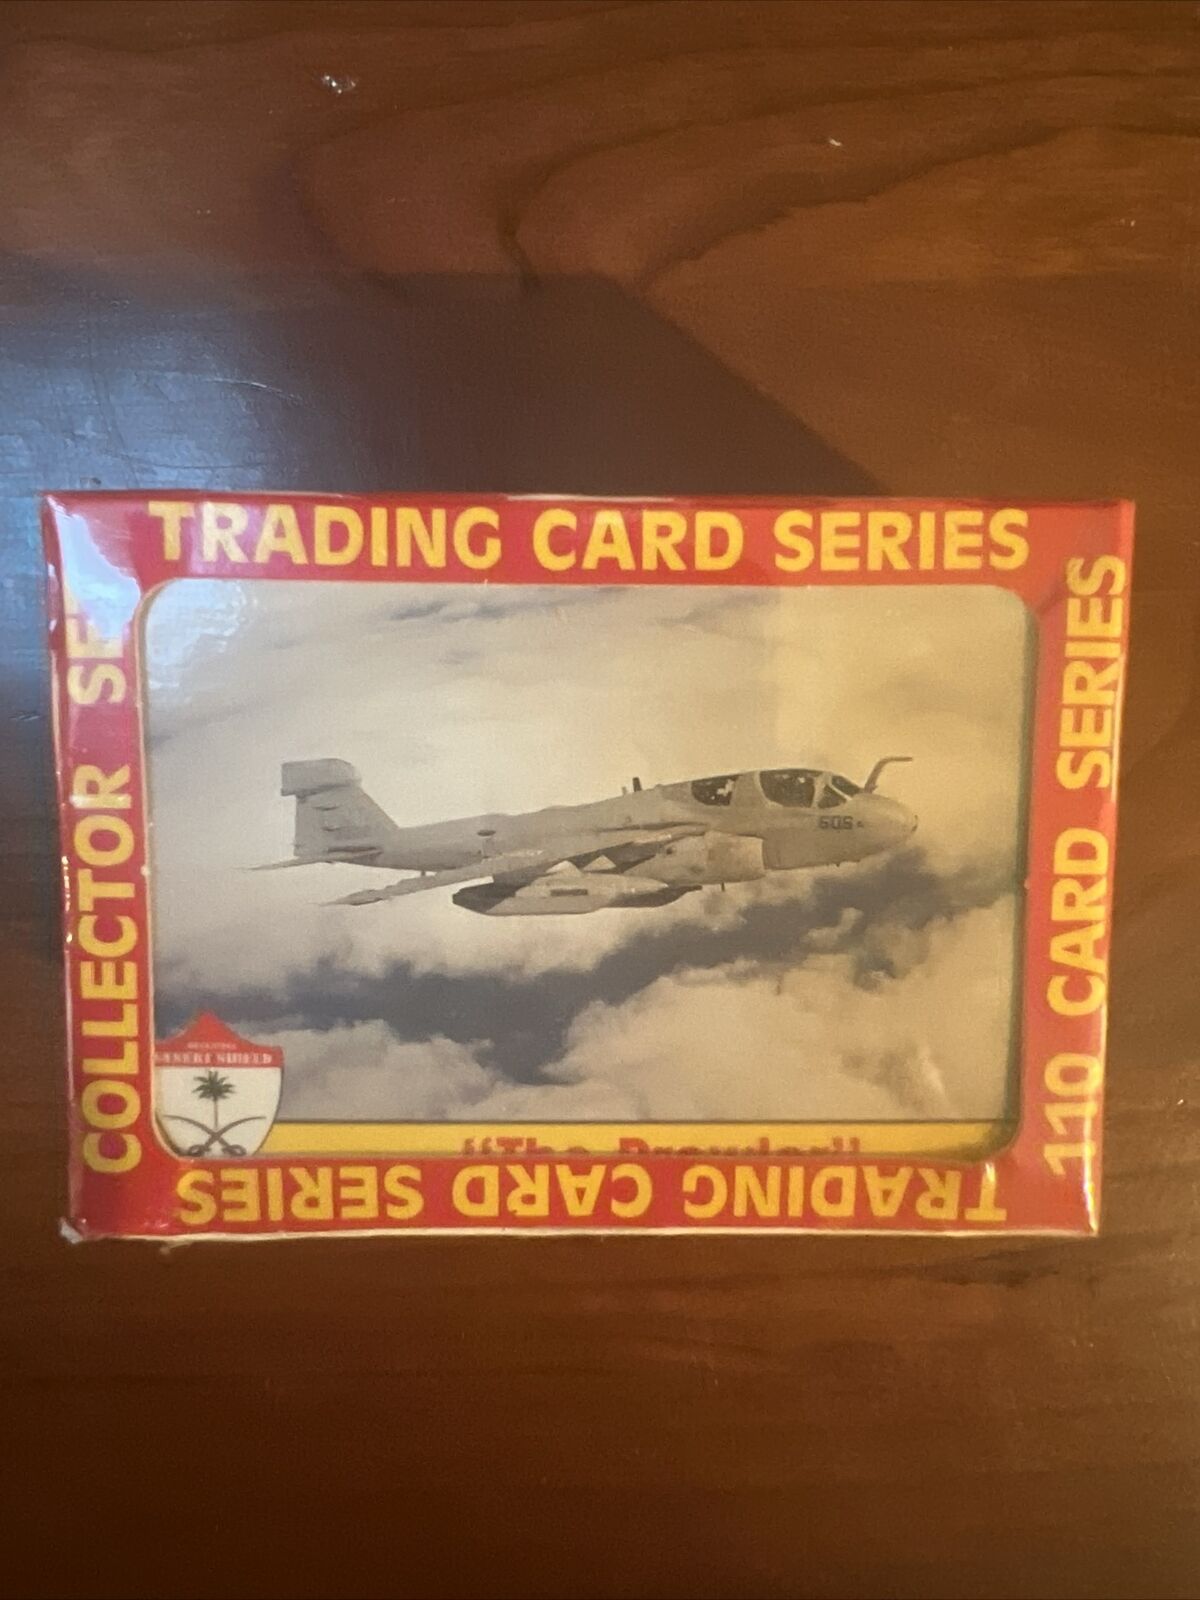 Lot of (8)- 1991 OPERATION Desert Shield US Military Card SEALED COLLECTOR Sets